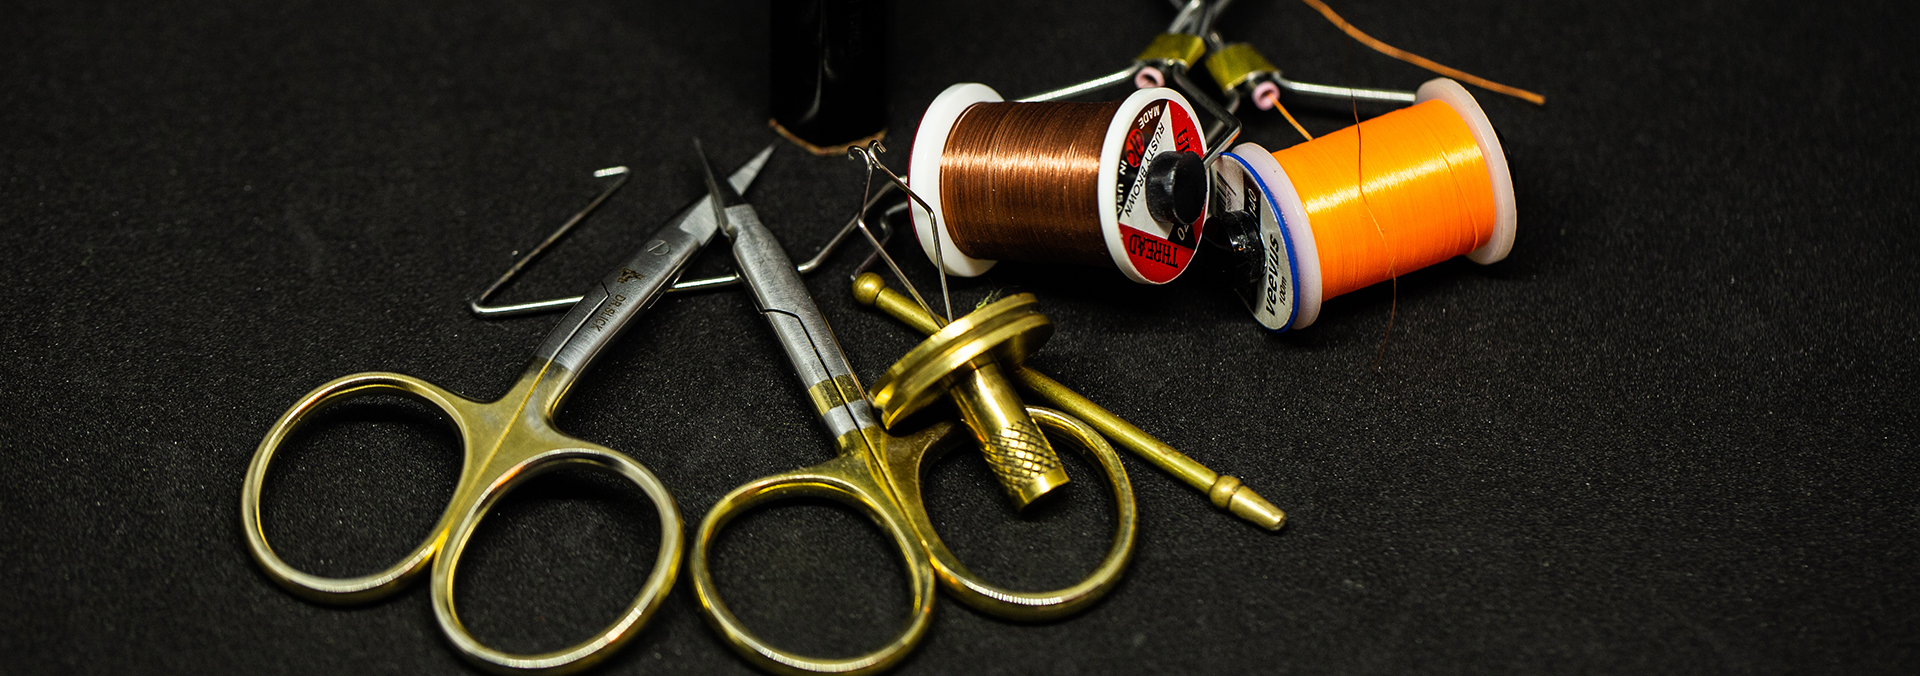 A Beginner’s Guide to Fly-Tying Tools